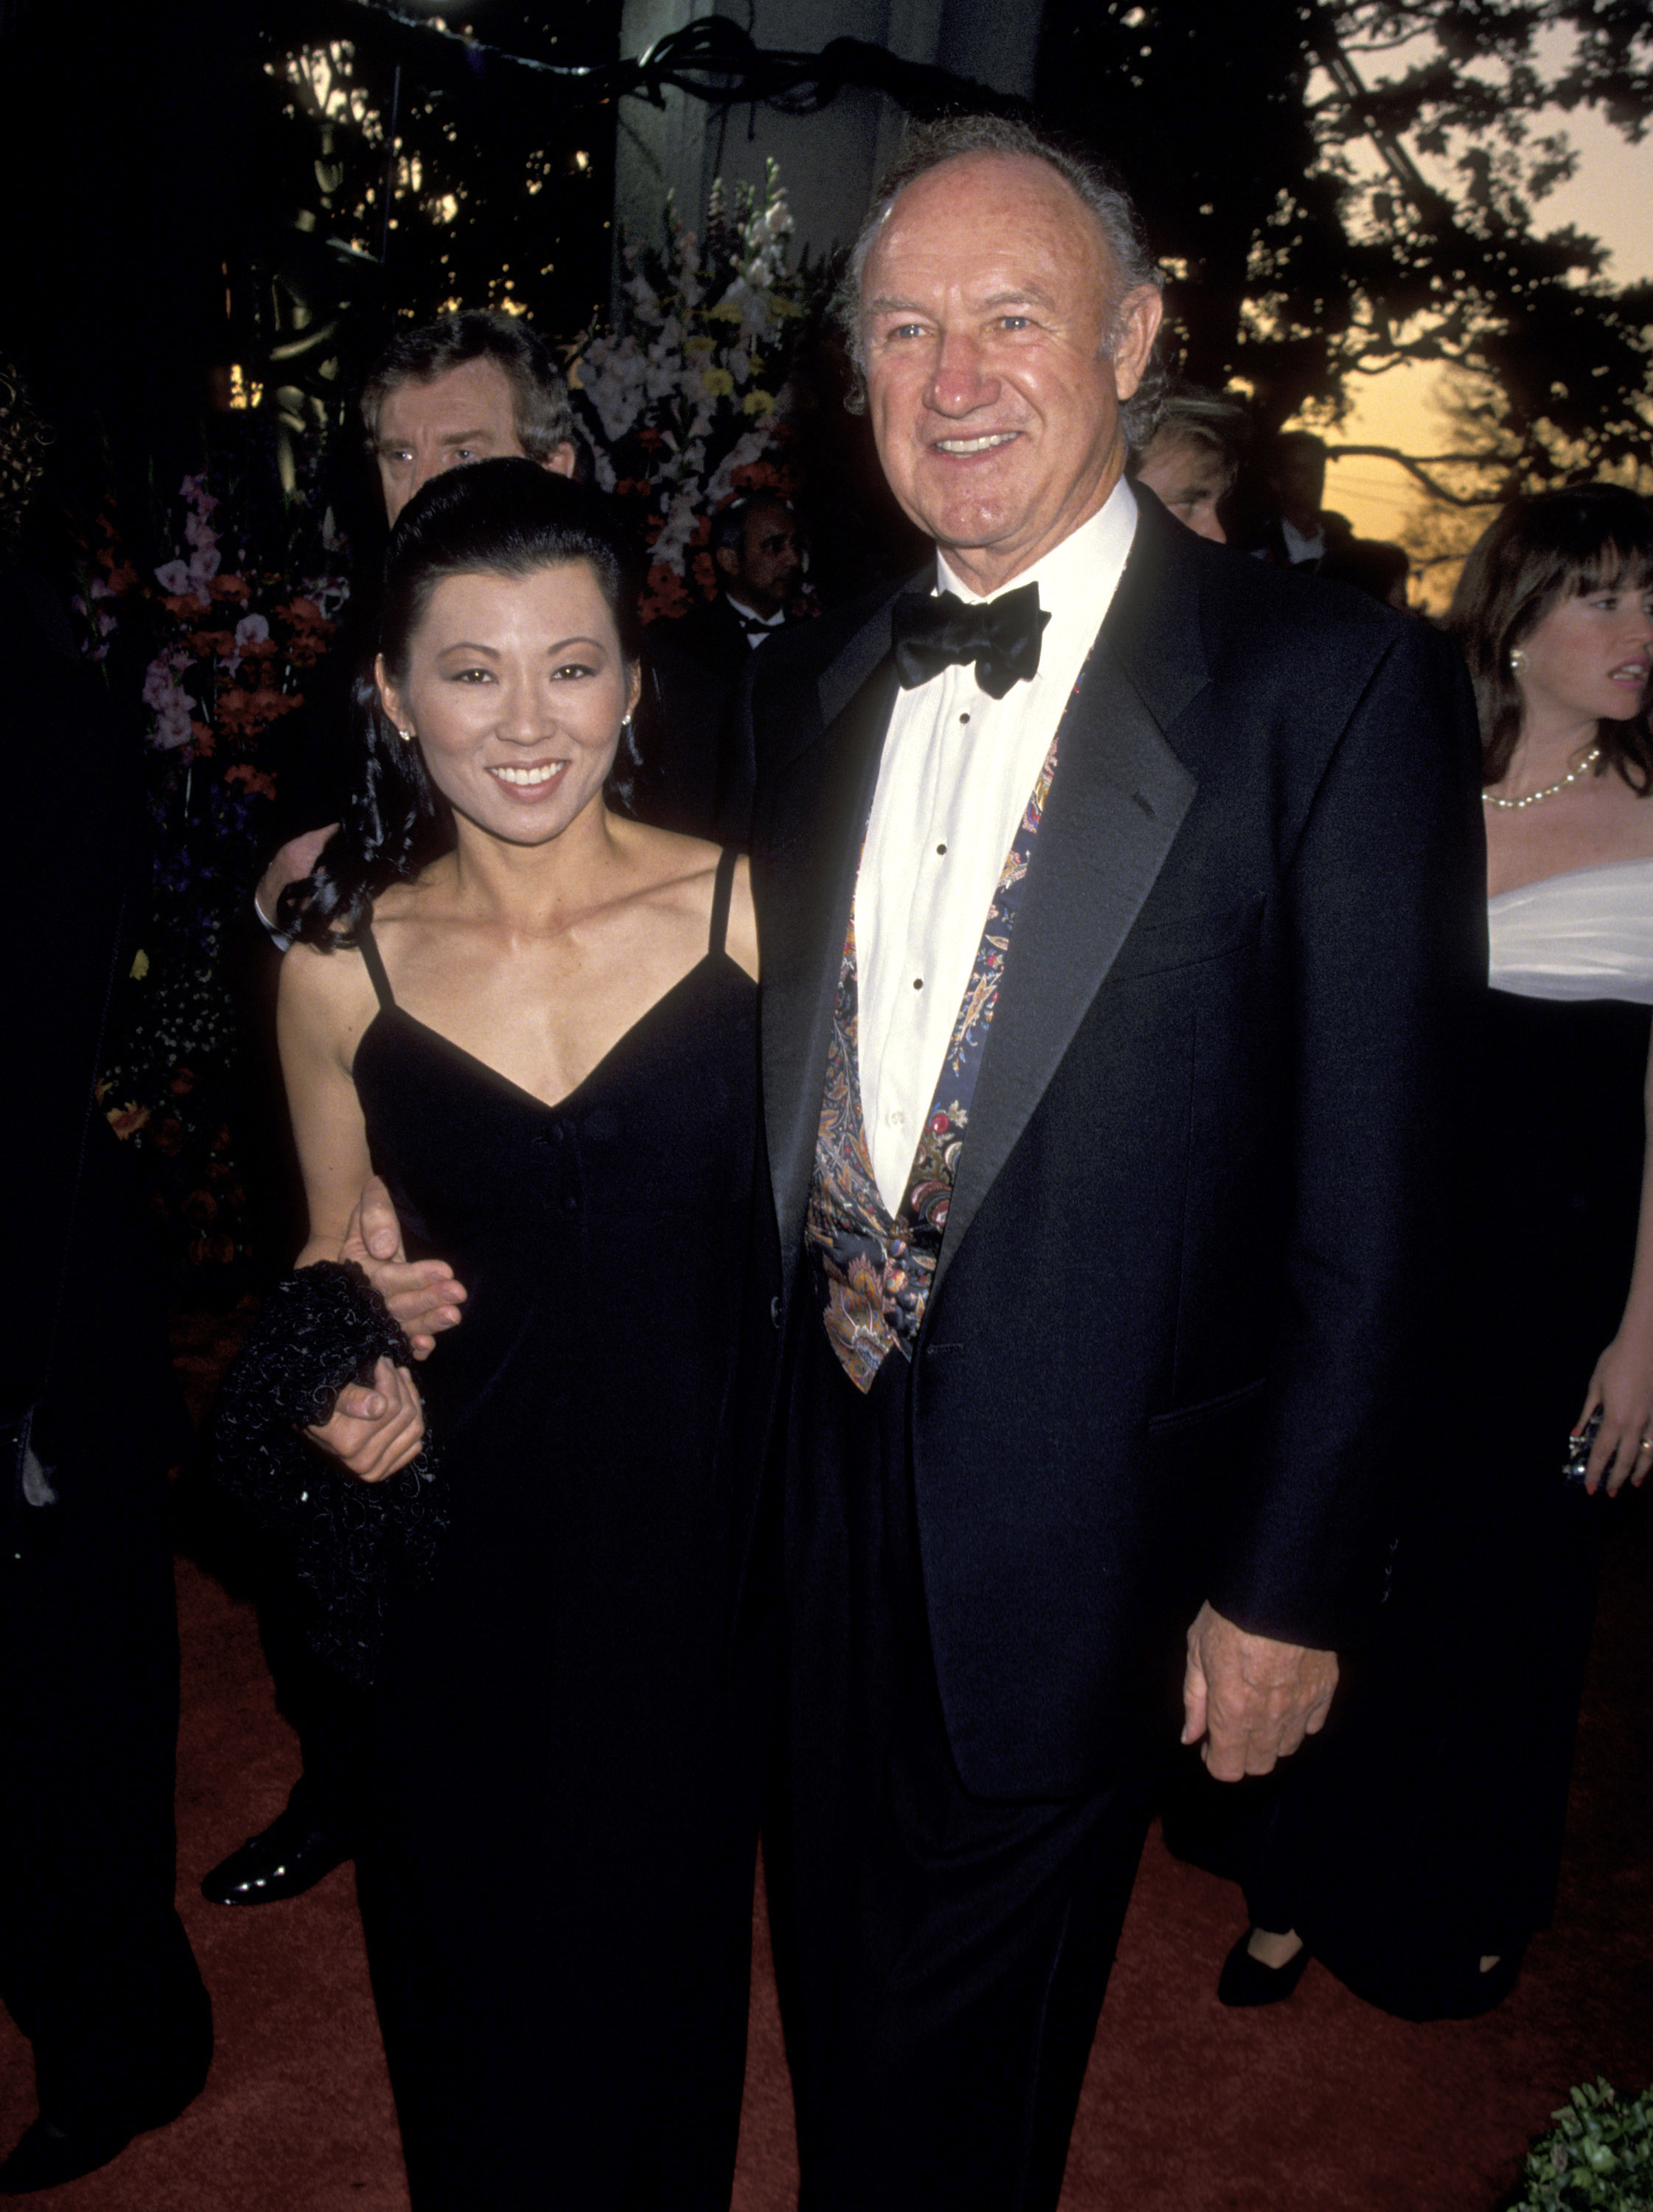 Gene Hackman and Betsy Arakawa at the 66th Annual Academy Awards in Los Angeles, California, on March 21, 1994 | Source: Getty Images